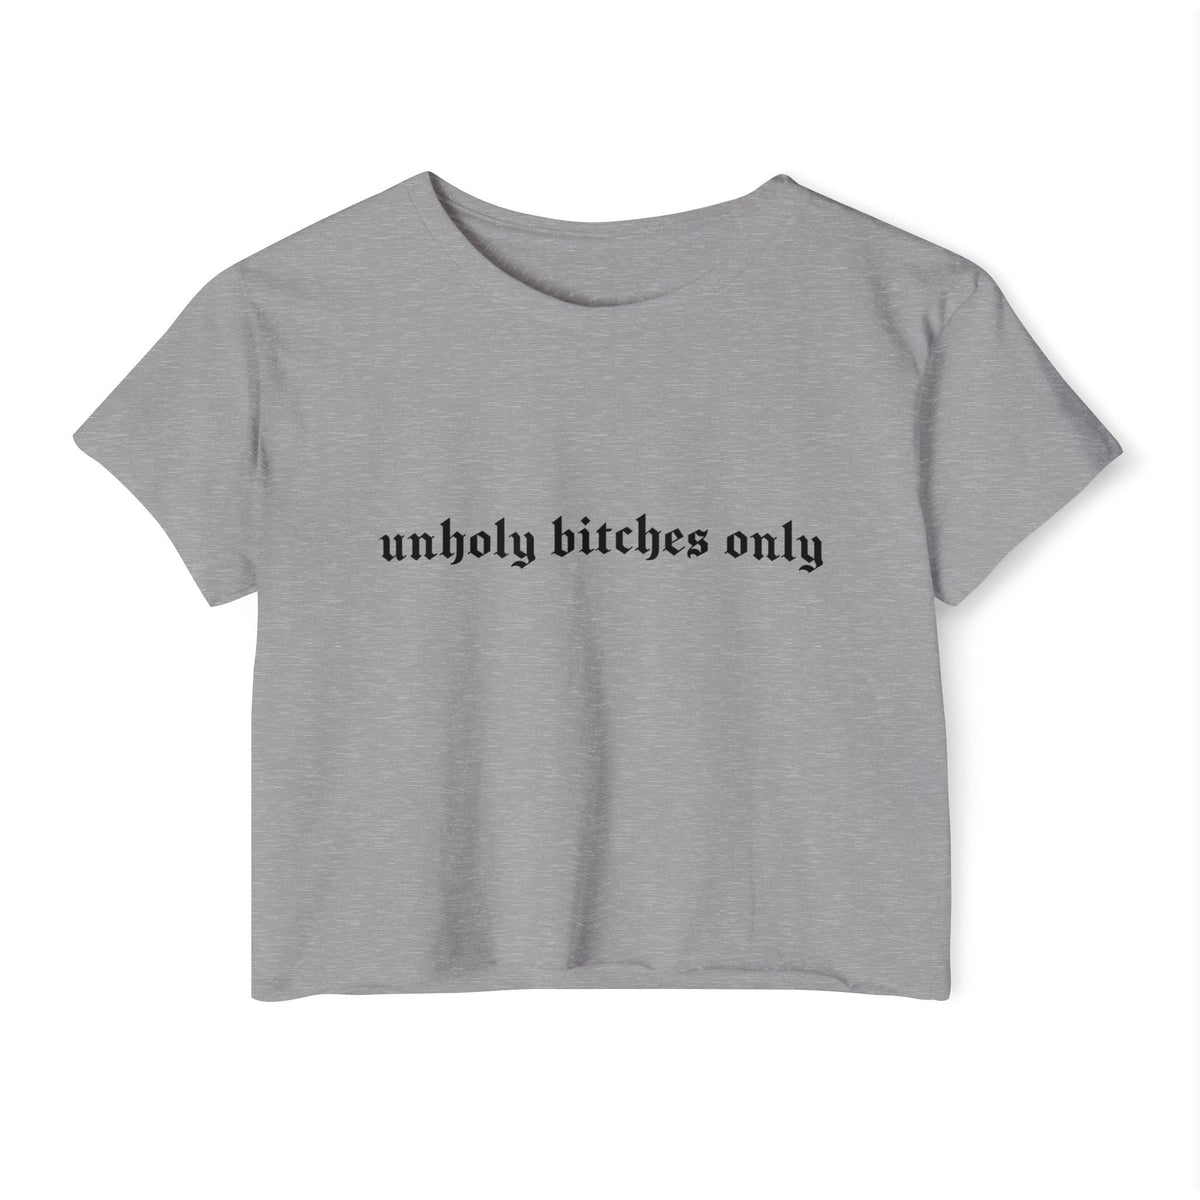 Unholy Bitches Only Women's Lightweight Crop Top - Goth Cloth Co.T - Shirt18118046264935359596